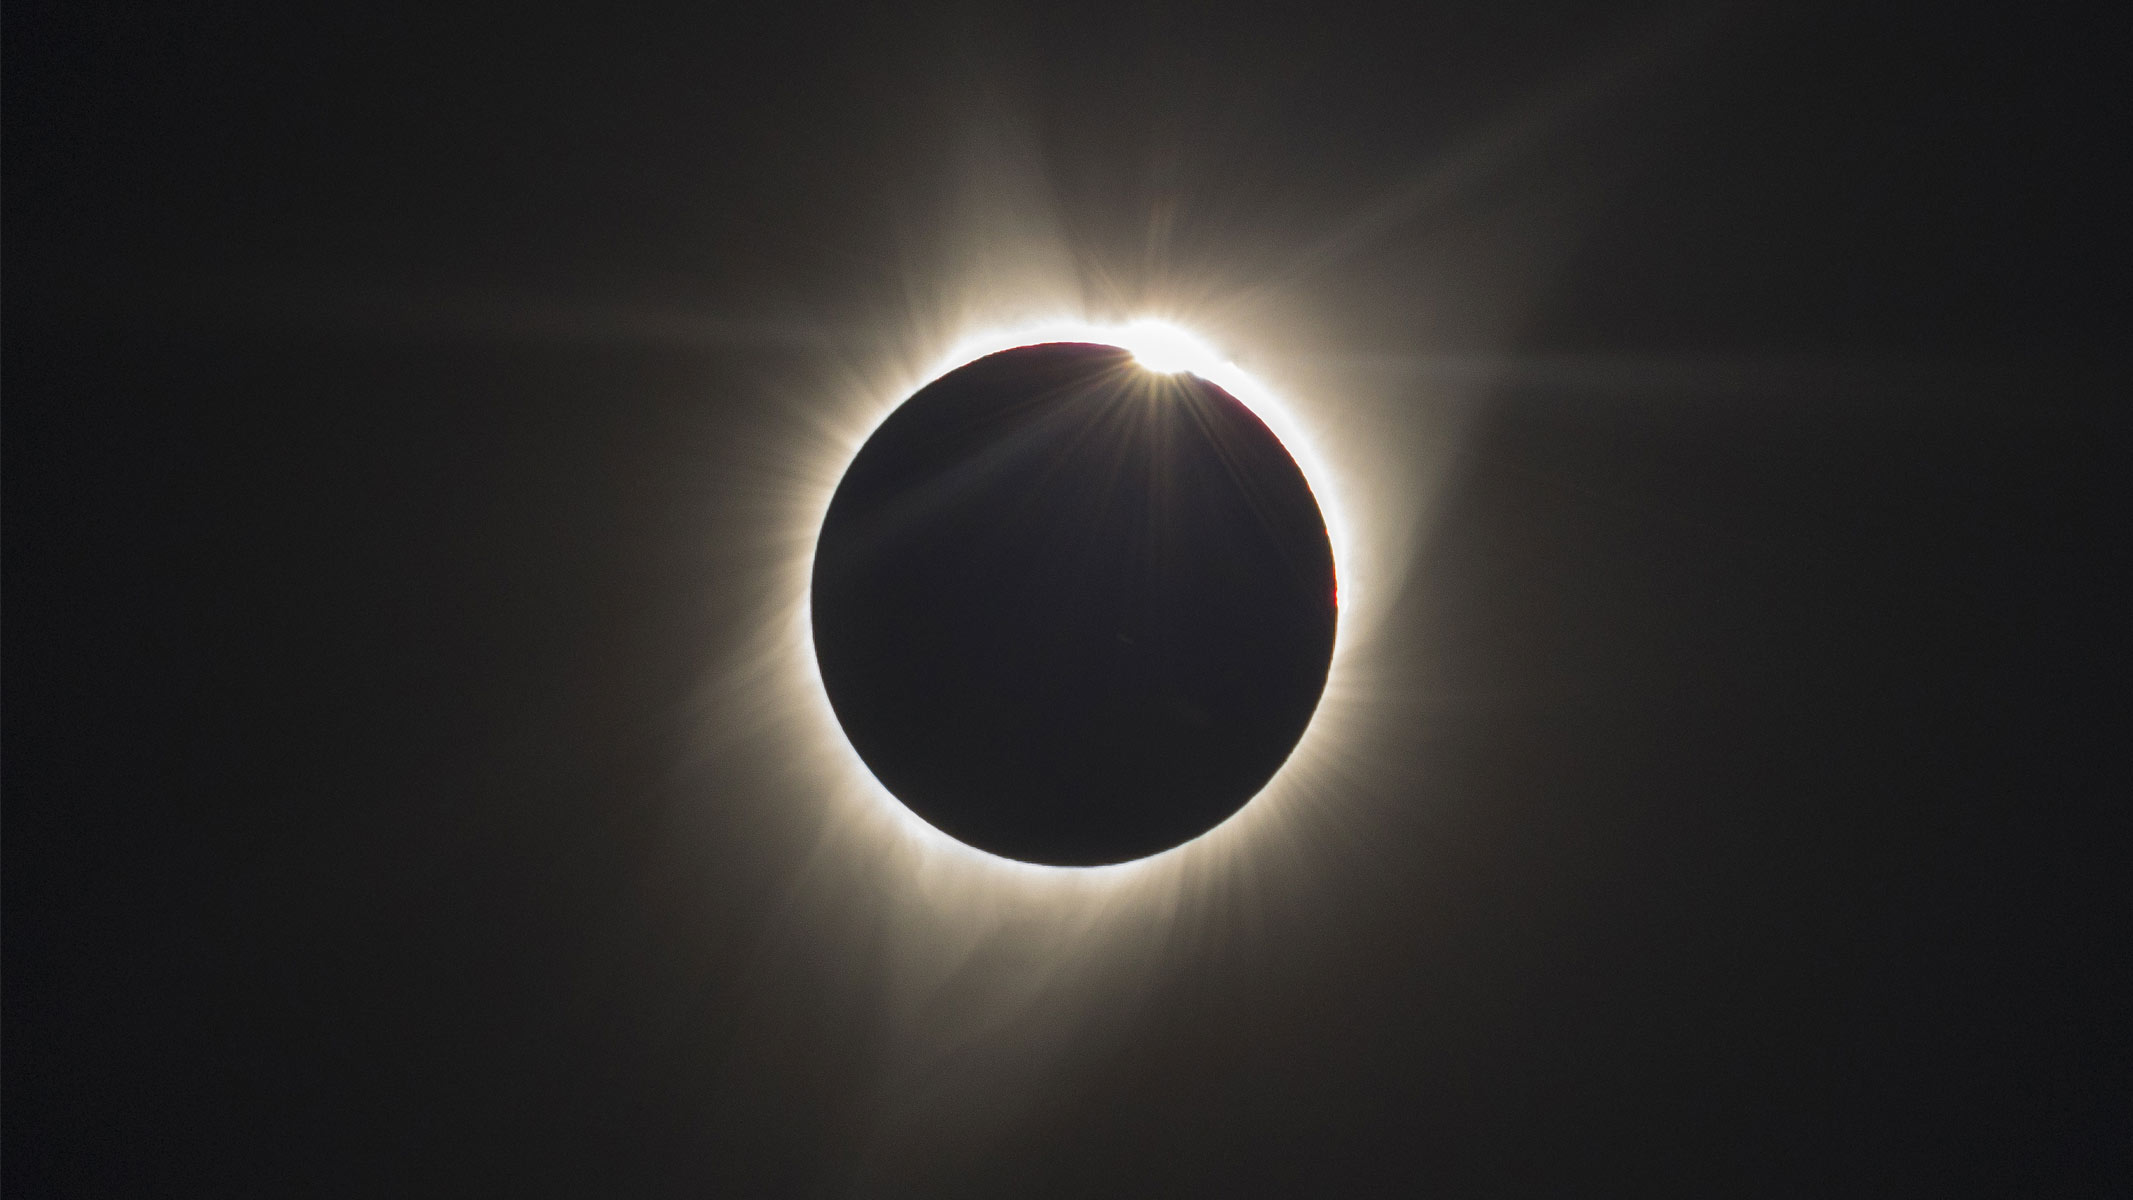 10 phenomena to see and photograph during April’s total solar eclipse Space